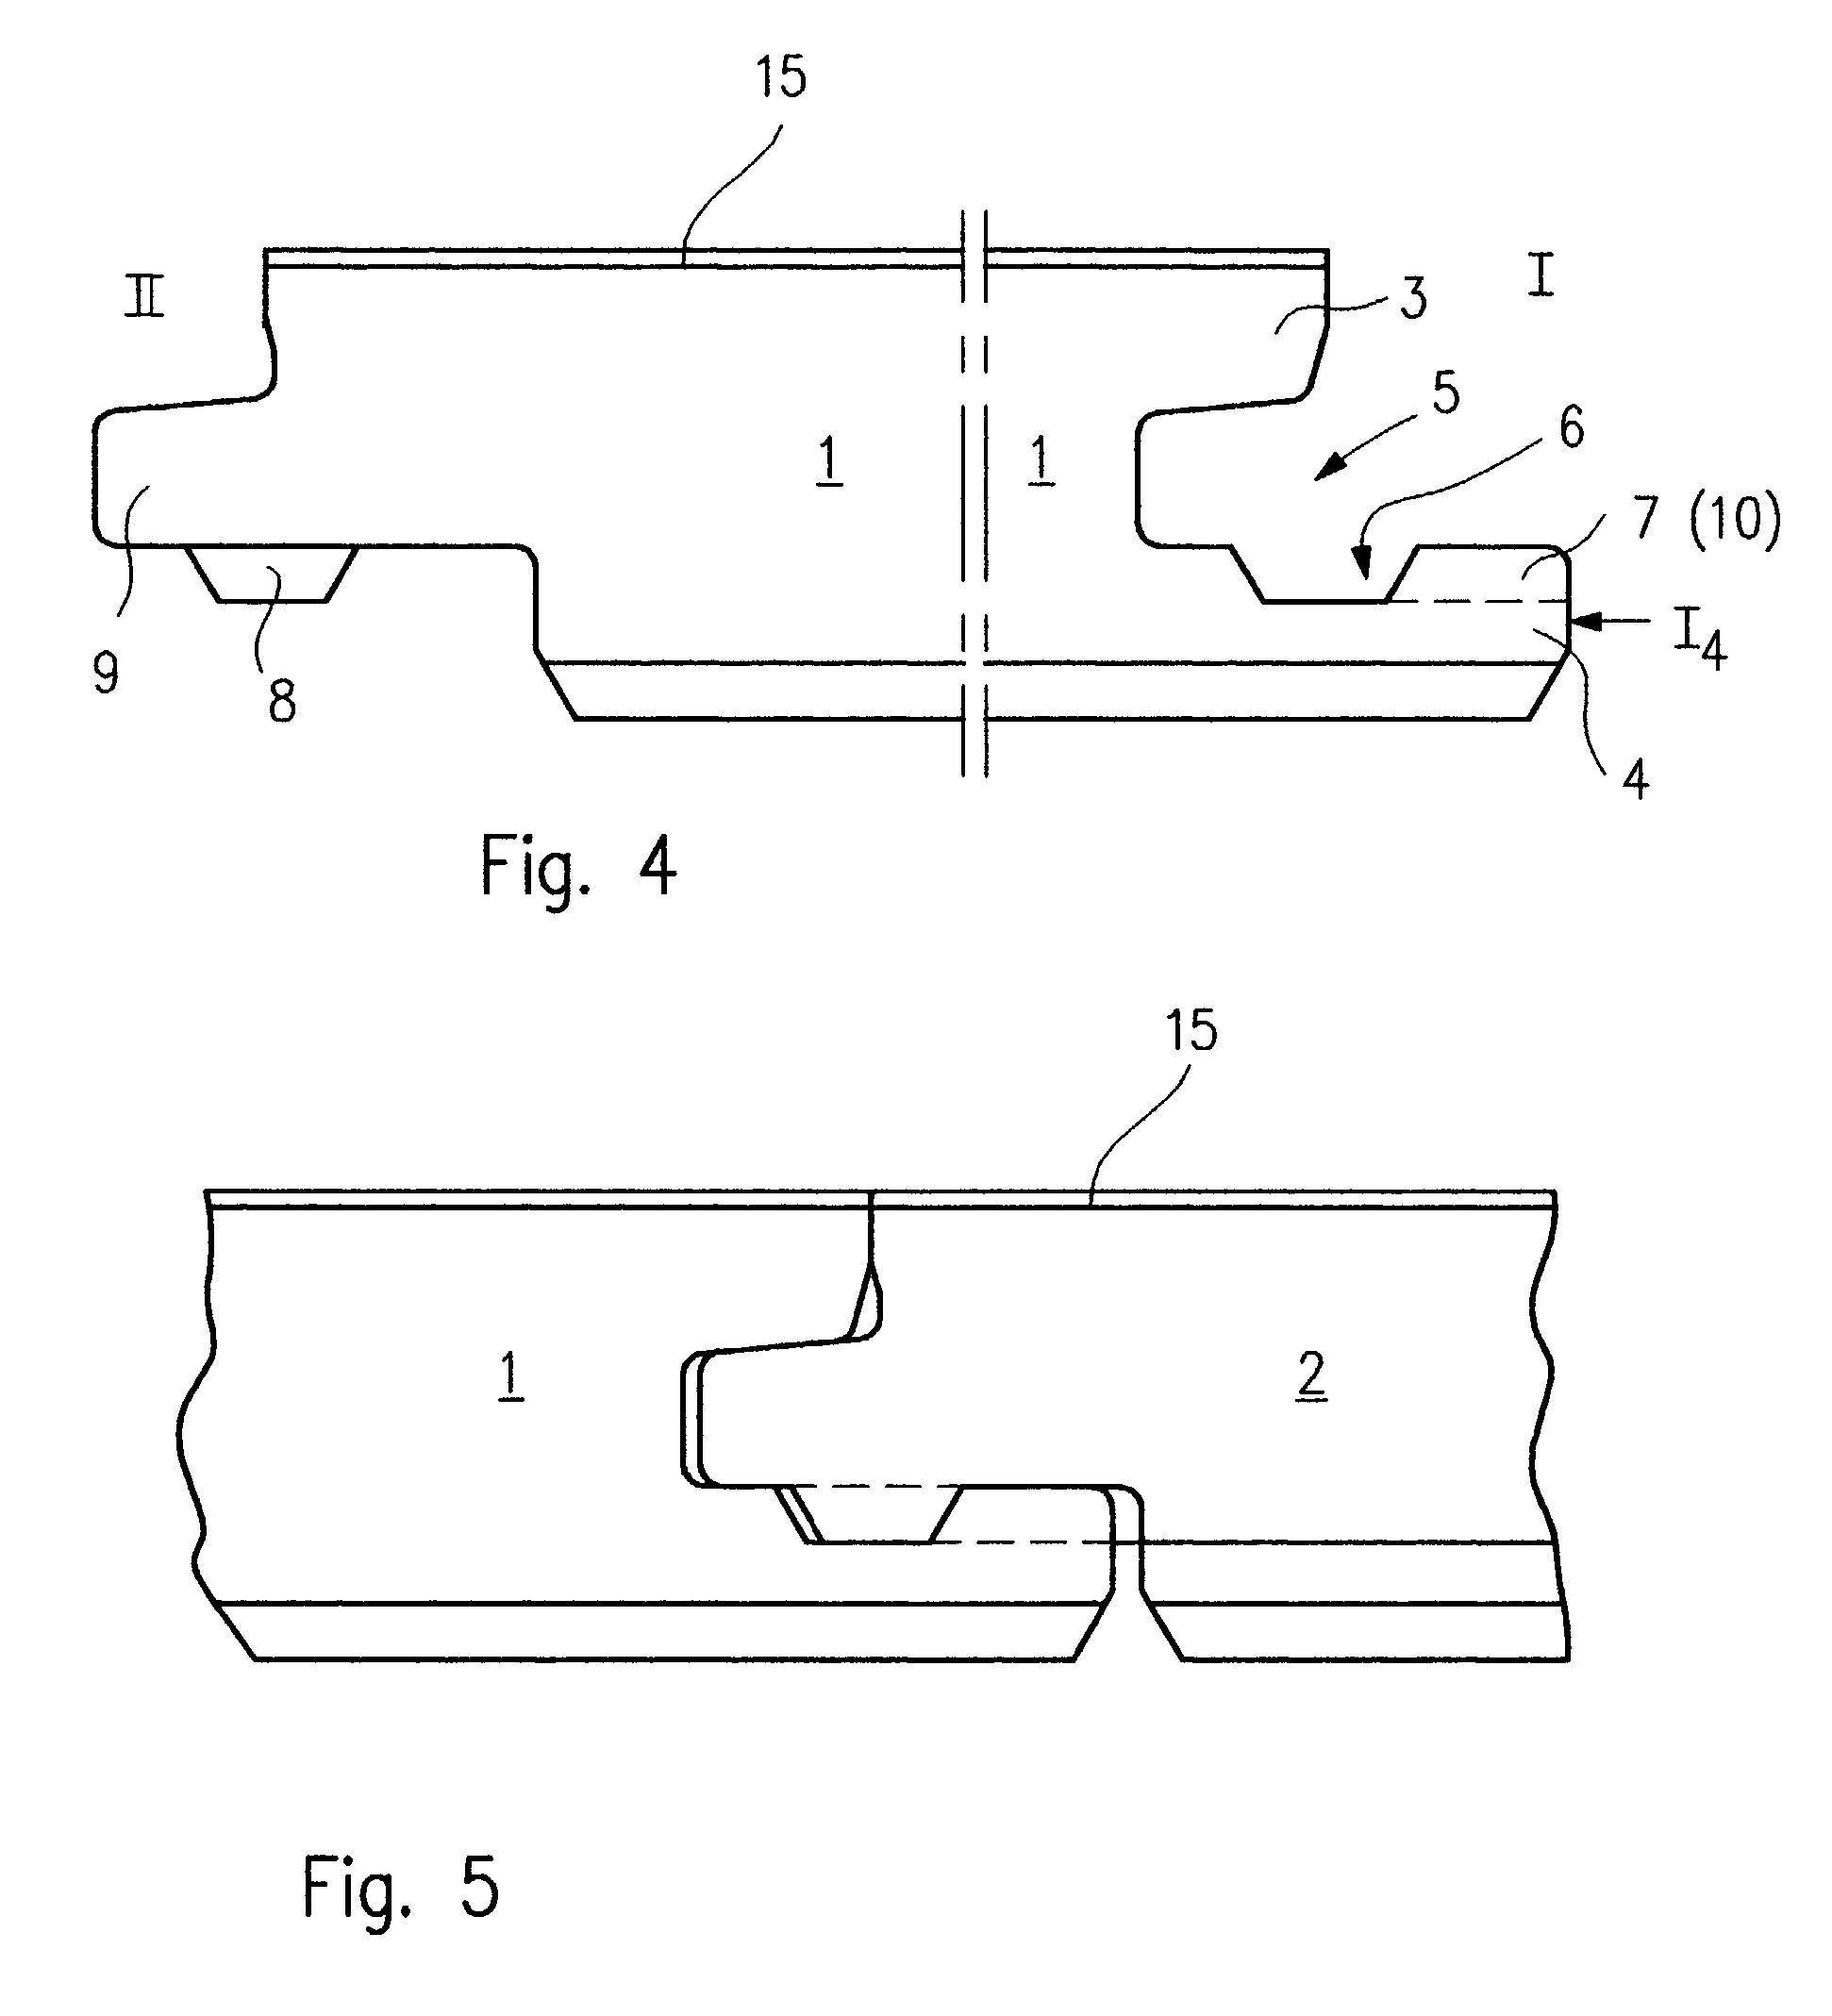 Structural panels and method of connecting same